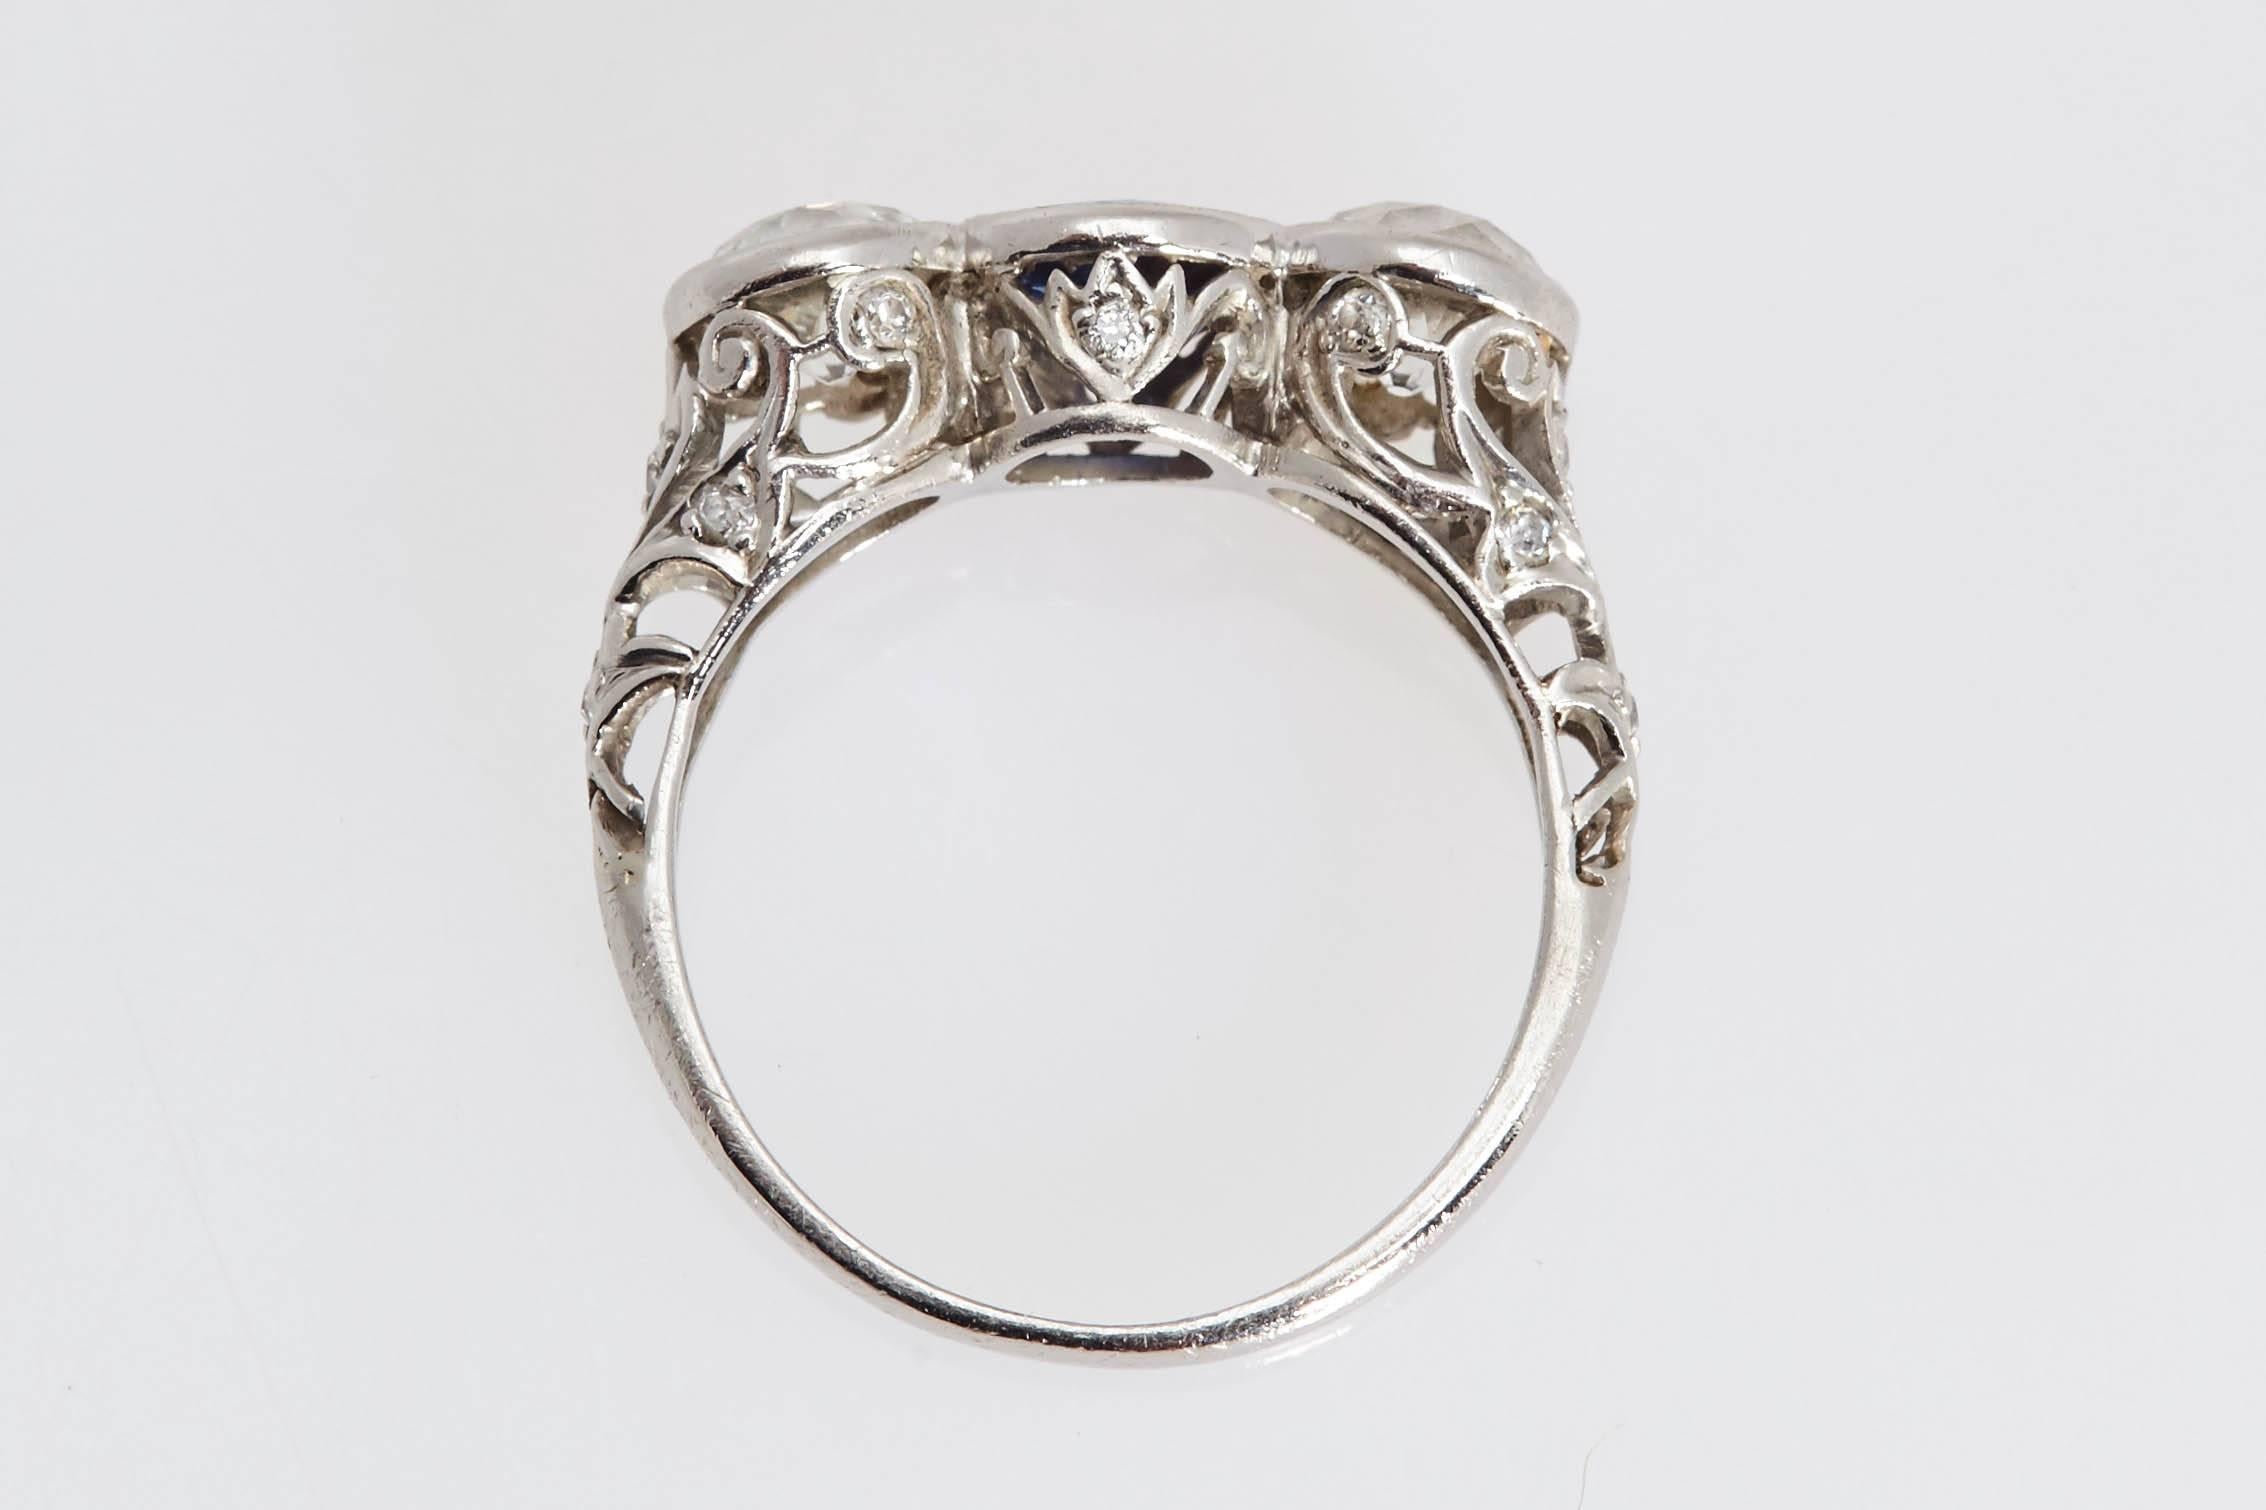 Beautifully detailed Edwardian platinum ring.  The ring is made up of a round blue sapphire in the center weighing .78 carat and two old miner shaped diamonds weighing approximately 1.60 carats. The diamonds are 